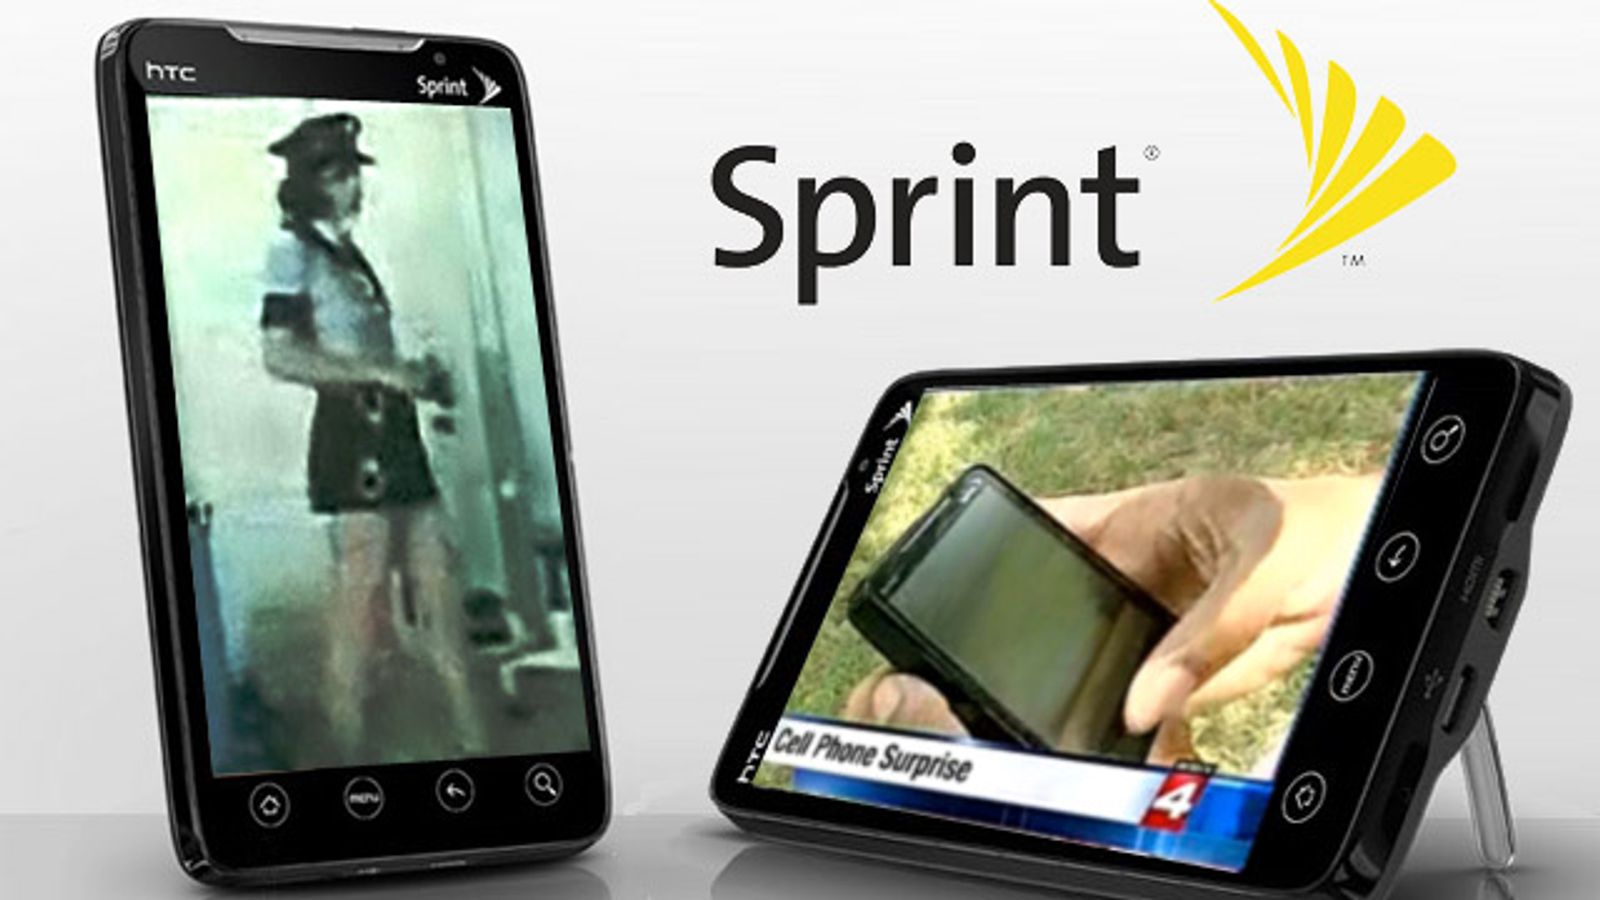 Sprint Sells ‘New’ Phone Thoughtfully Loaded With Porn